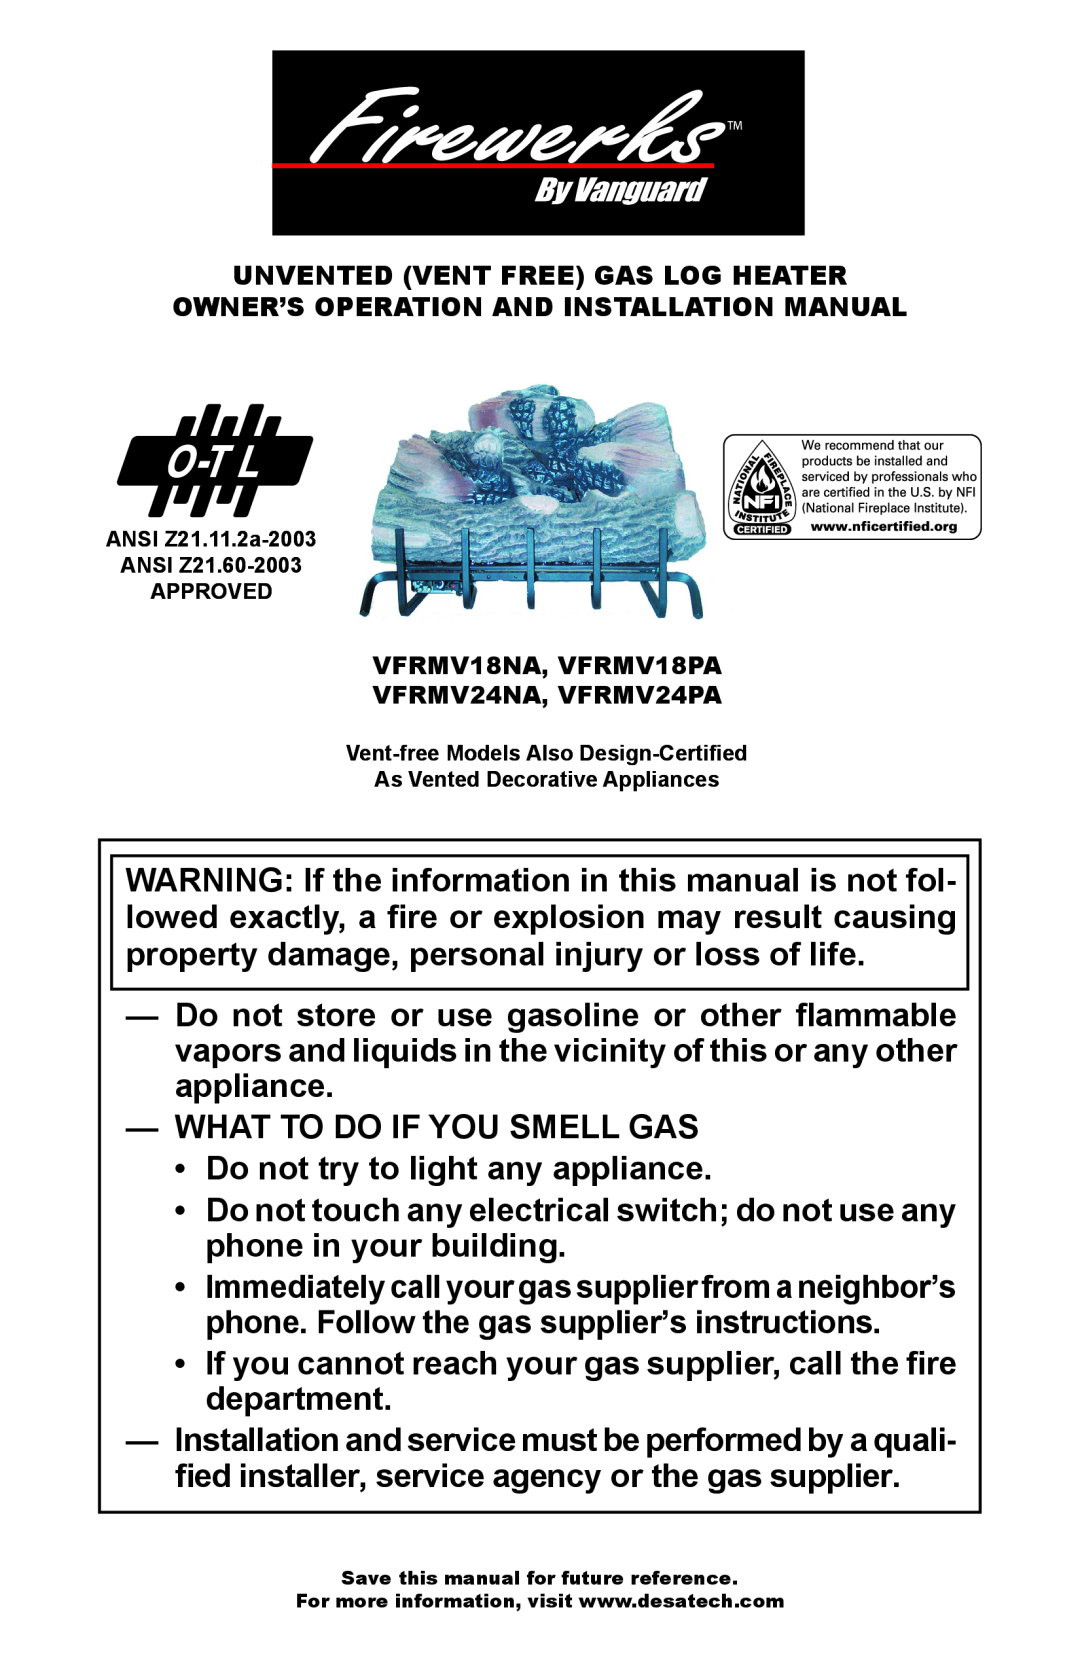 Desa VFRMV18PA, VFRMV18NA, VFRMV24NA, VFRMV24PA installation manual What To Do If You Smell Gas 